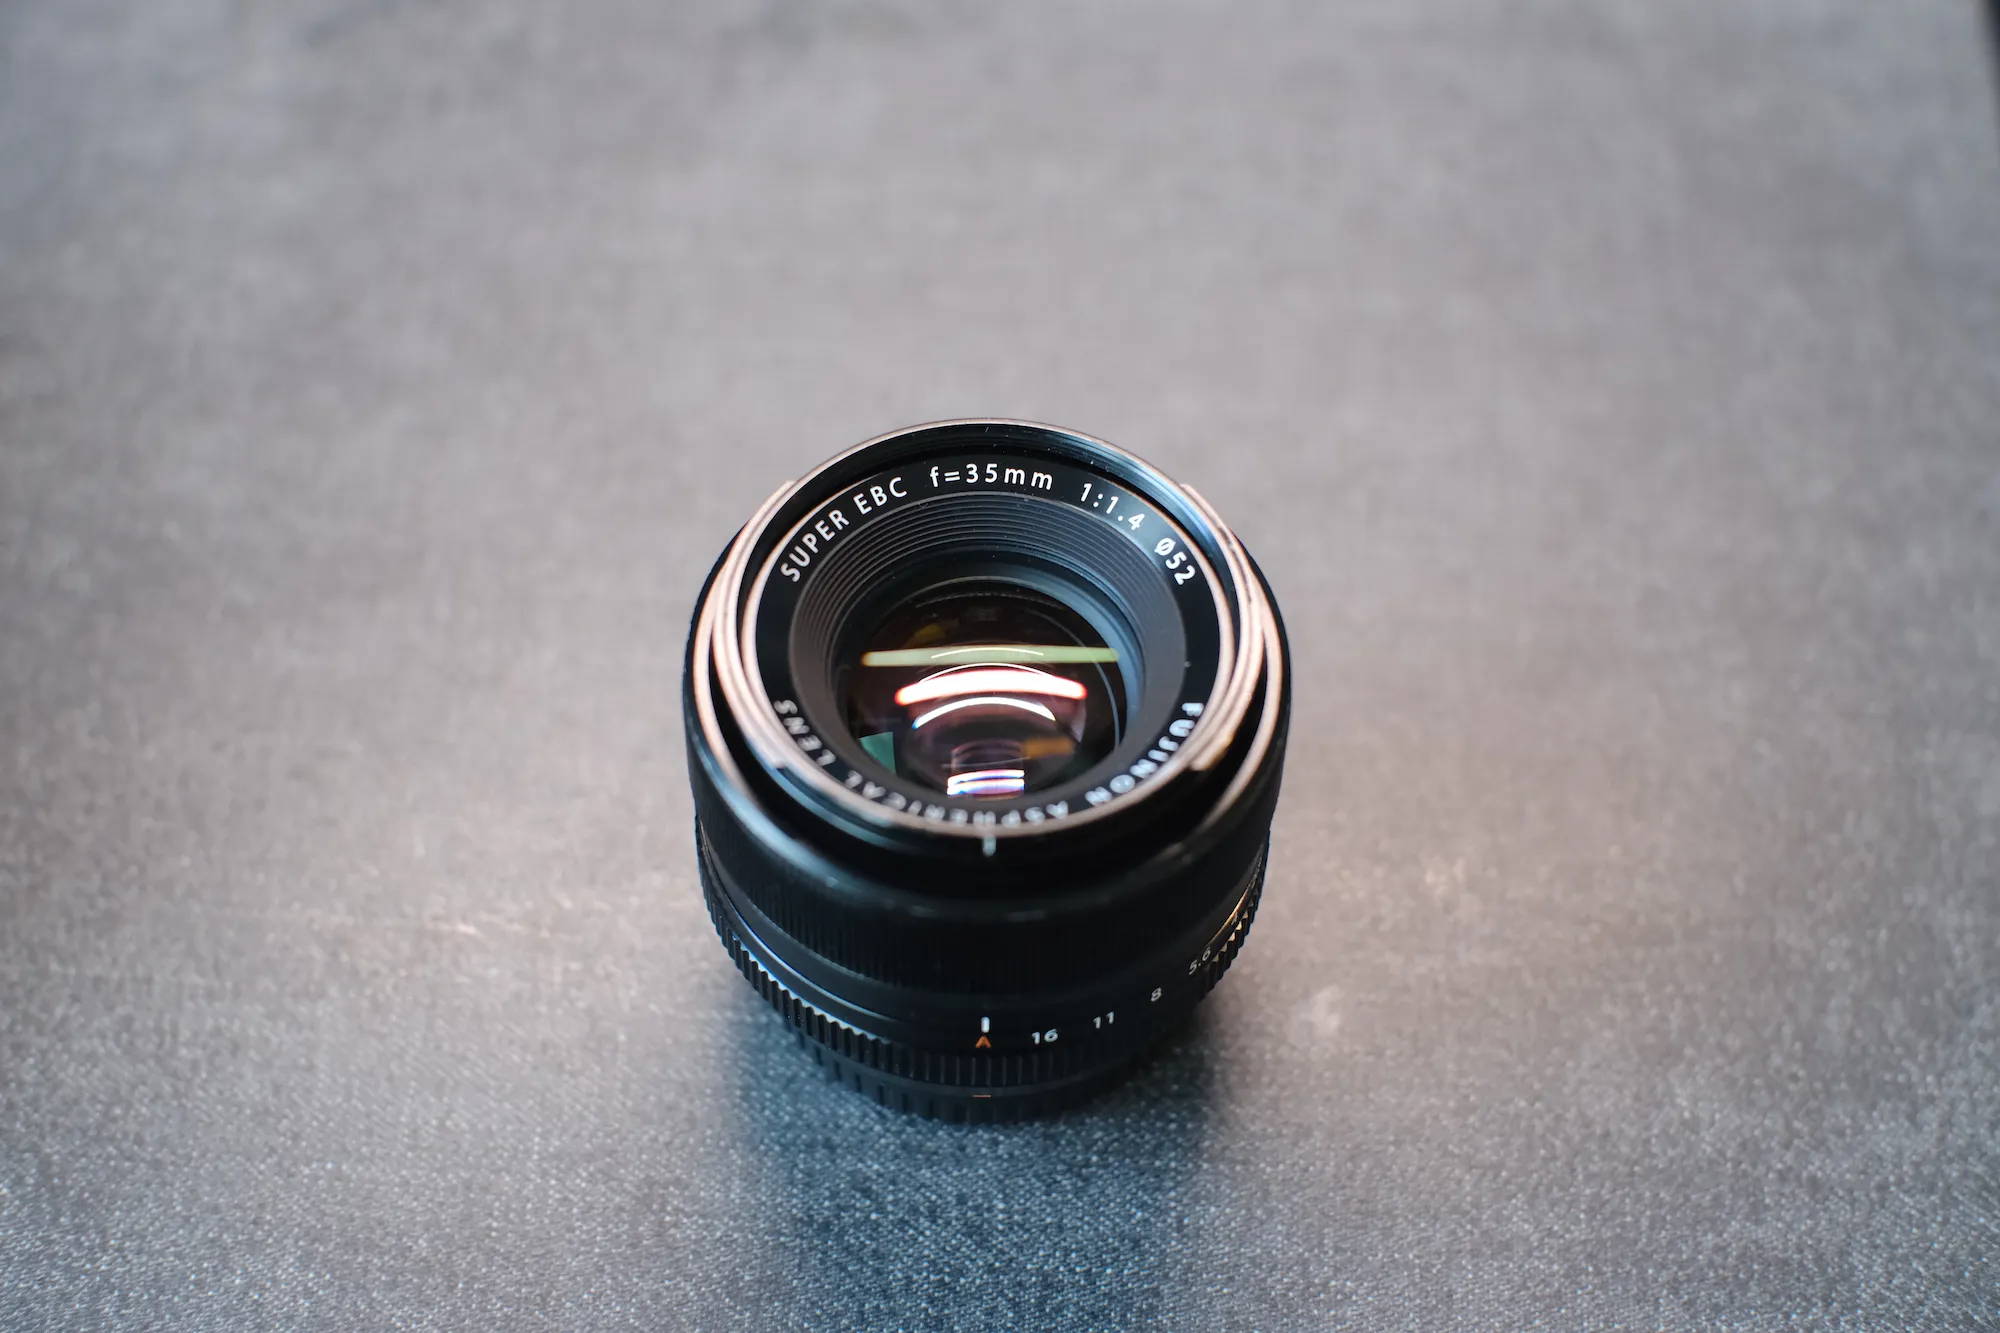 The 35mm f1.4 Lens